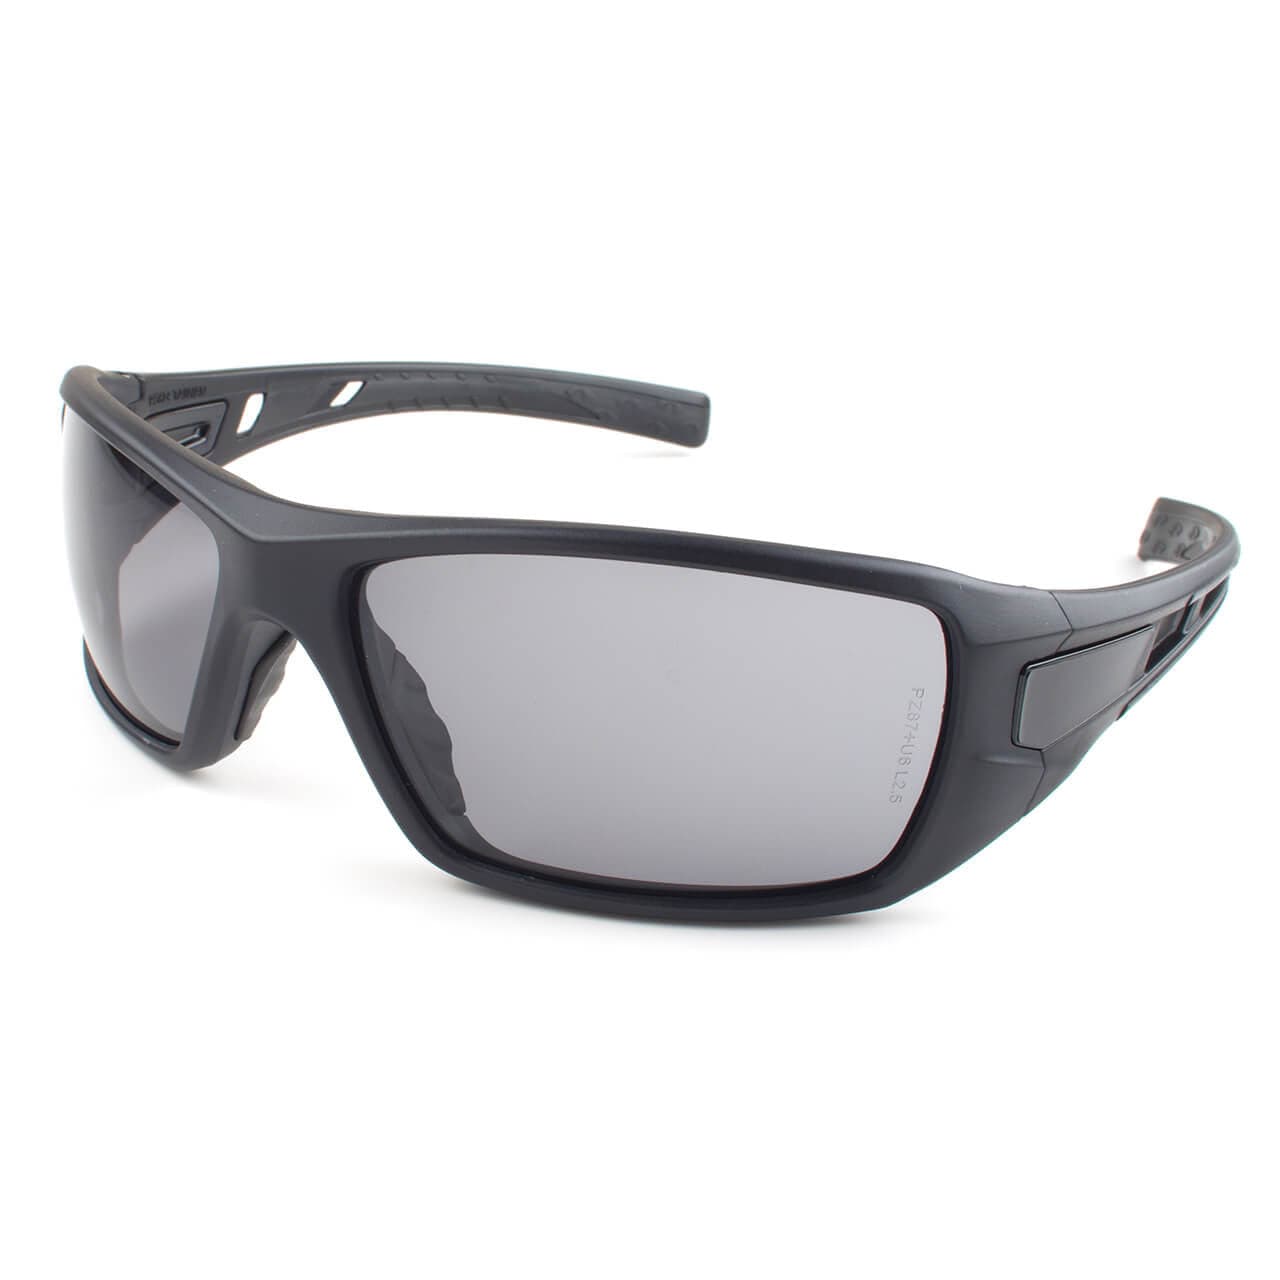 Metel M30 Safety Glasses with Black Frame and Gray Lenses